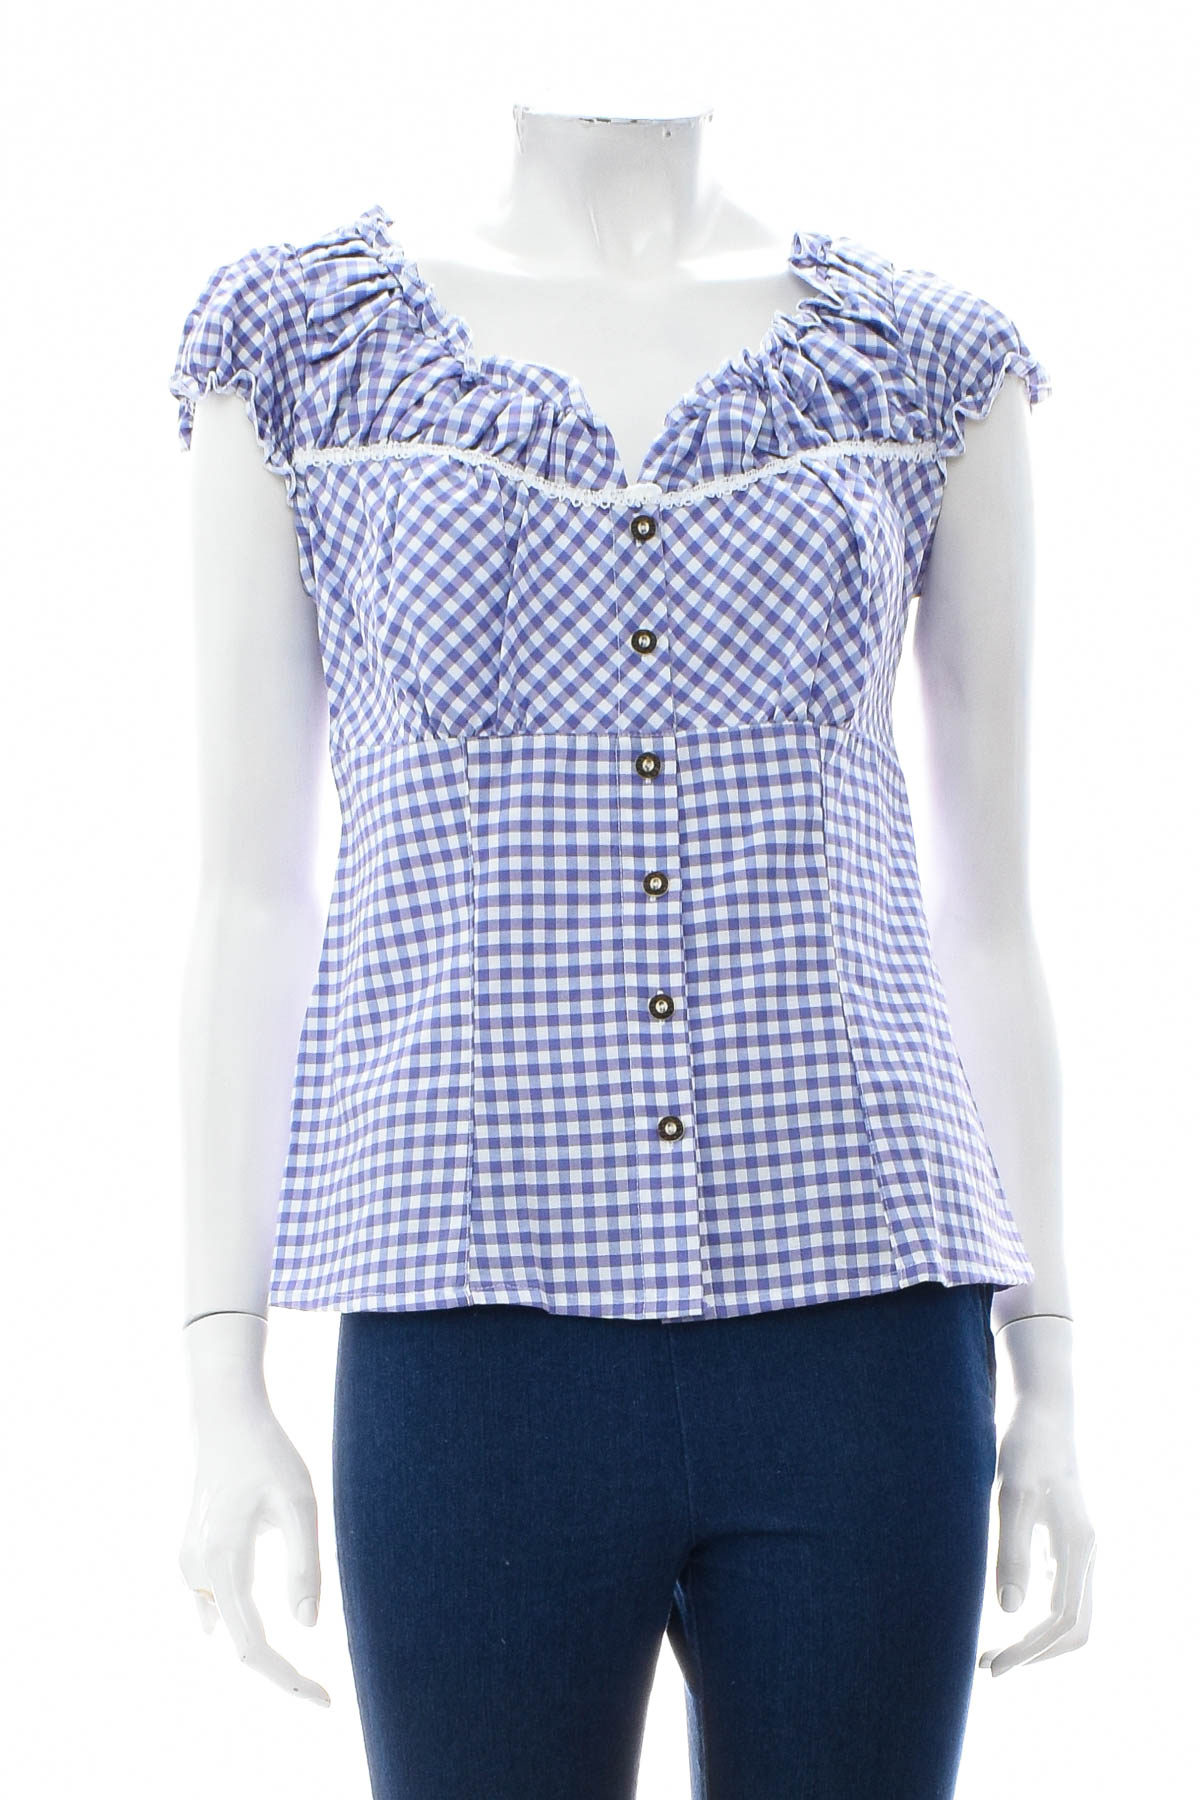 Women's shirt - Ludwig & Therese - 0